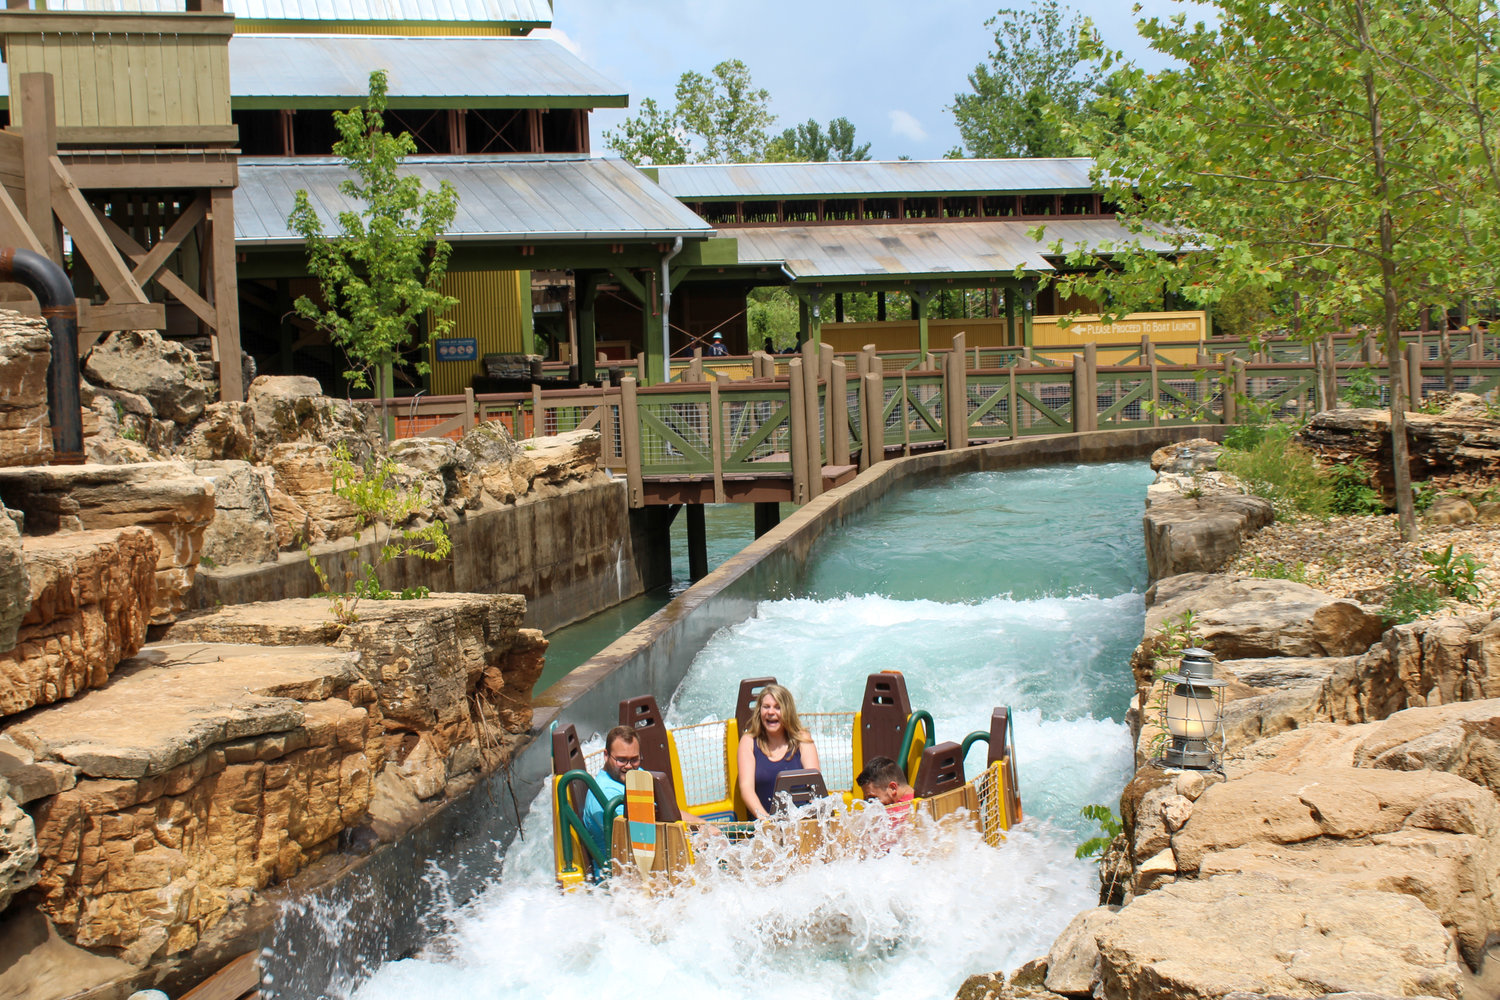 Silver Dollar City in 2020 opened its $23 million Mystic River Falls ride.